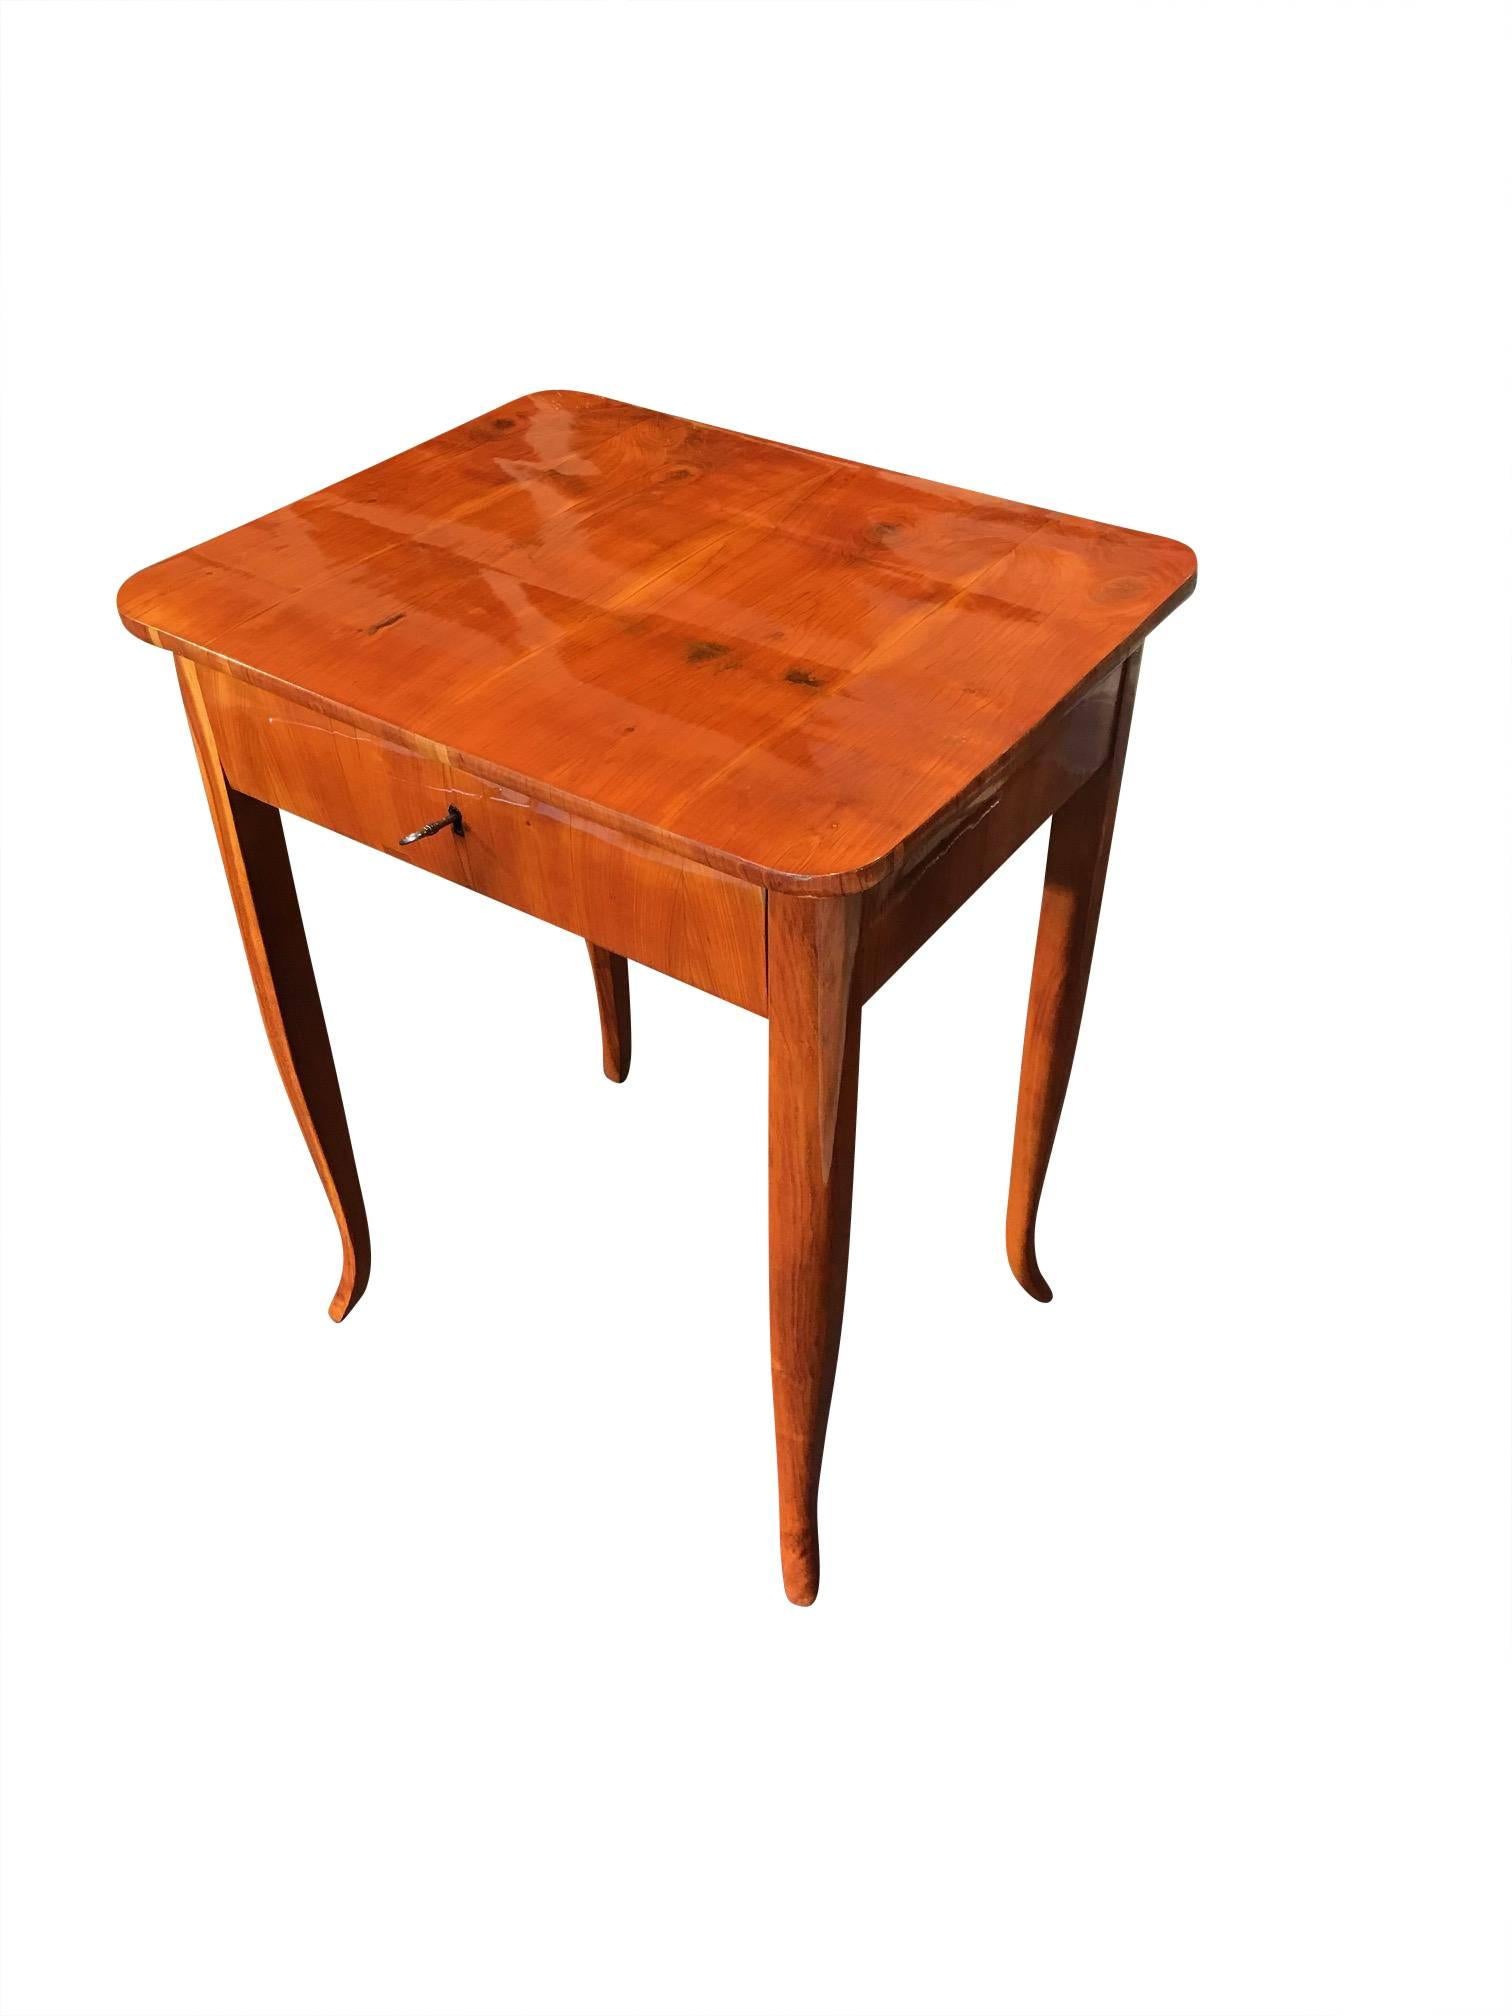 Wonderful and very elegant Biedermeier side table from South Germany, manufactured circa 1830. The table has one drawer at the front, is veneered with cheerywood and also has cherry solid wood parts like the curved legs. The key sign is ebonized and